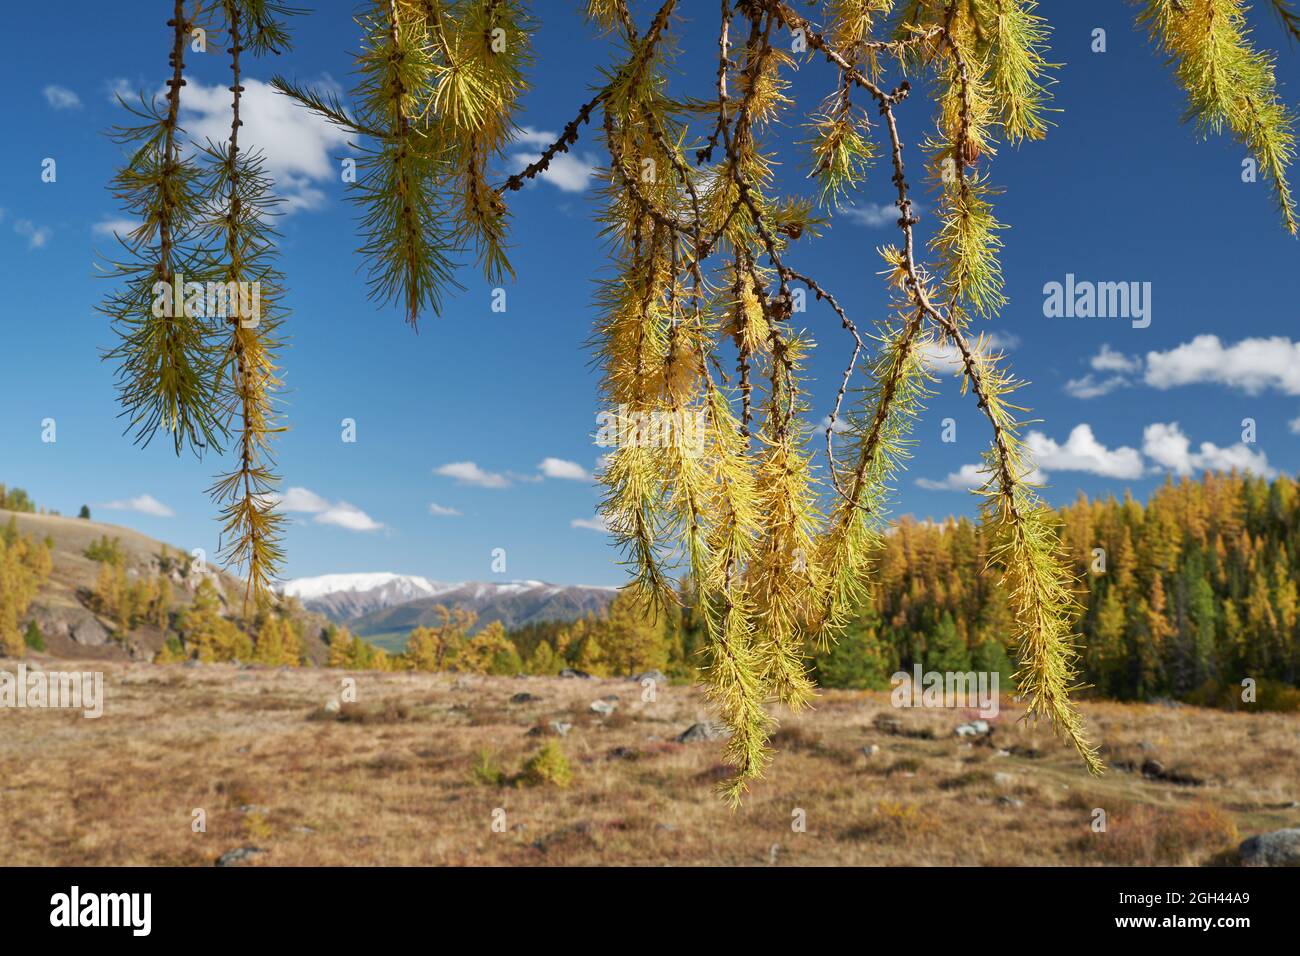 North Chuiskiy Ridge with Larix branches on foreground and mountains with larch forest on background. Autumn, trees are in fall yellow colors. Altai, Stock Photo